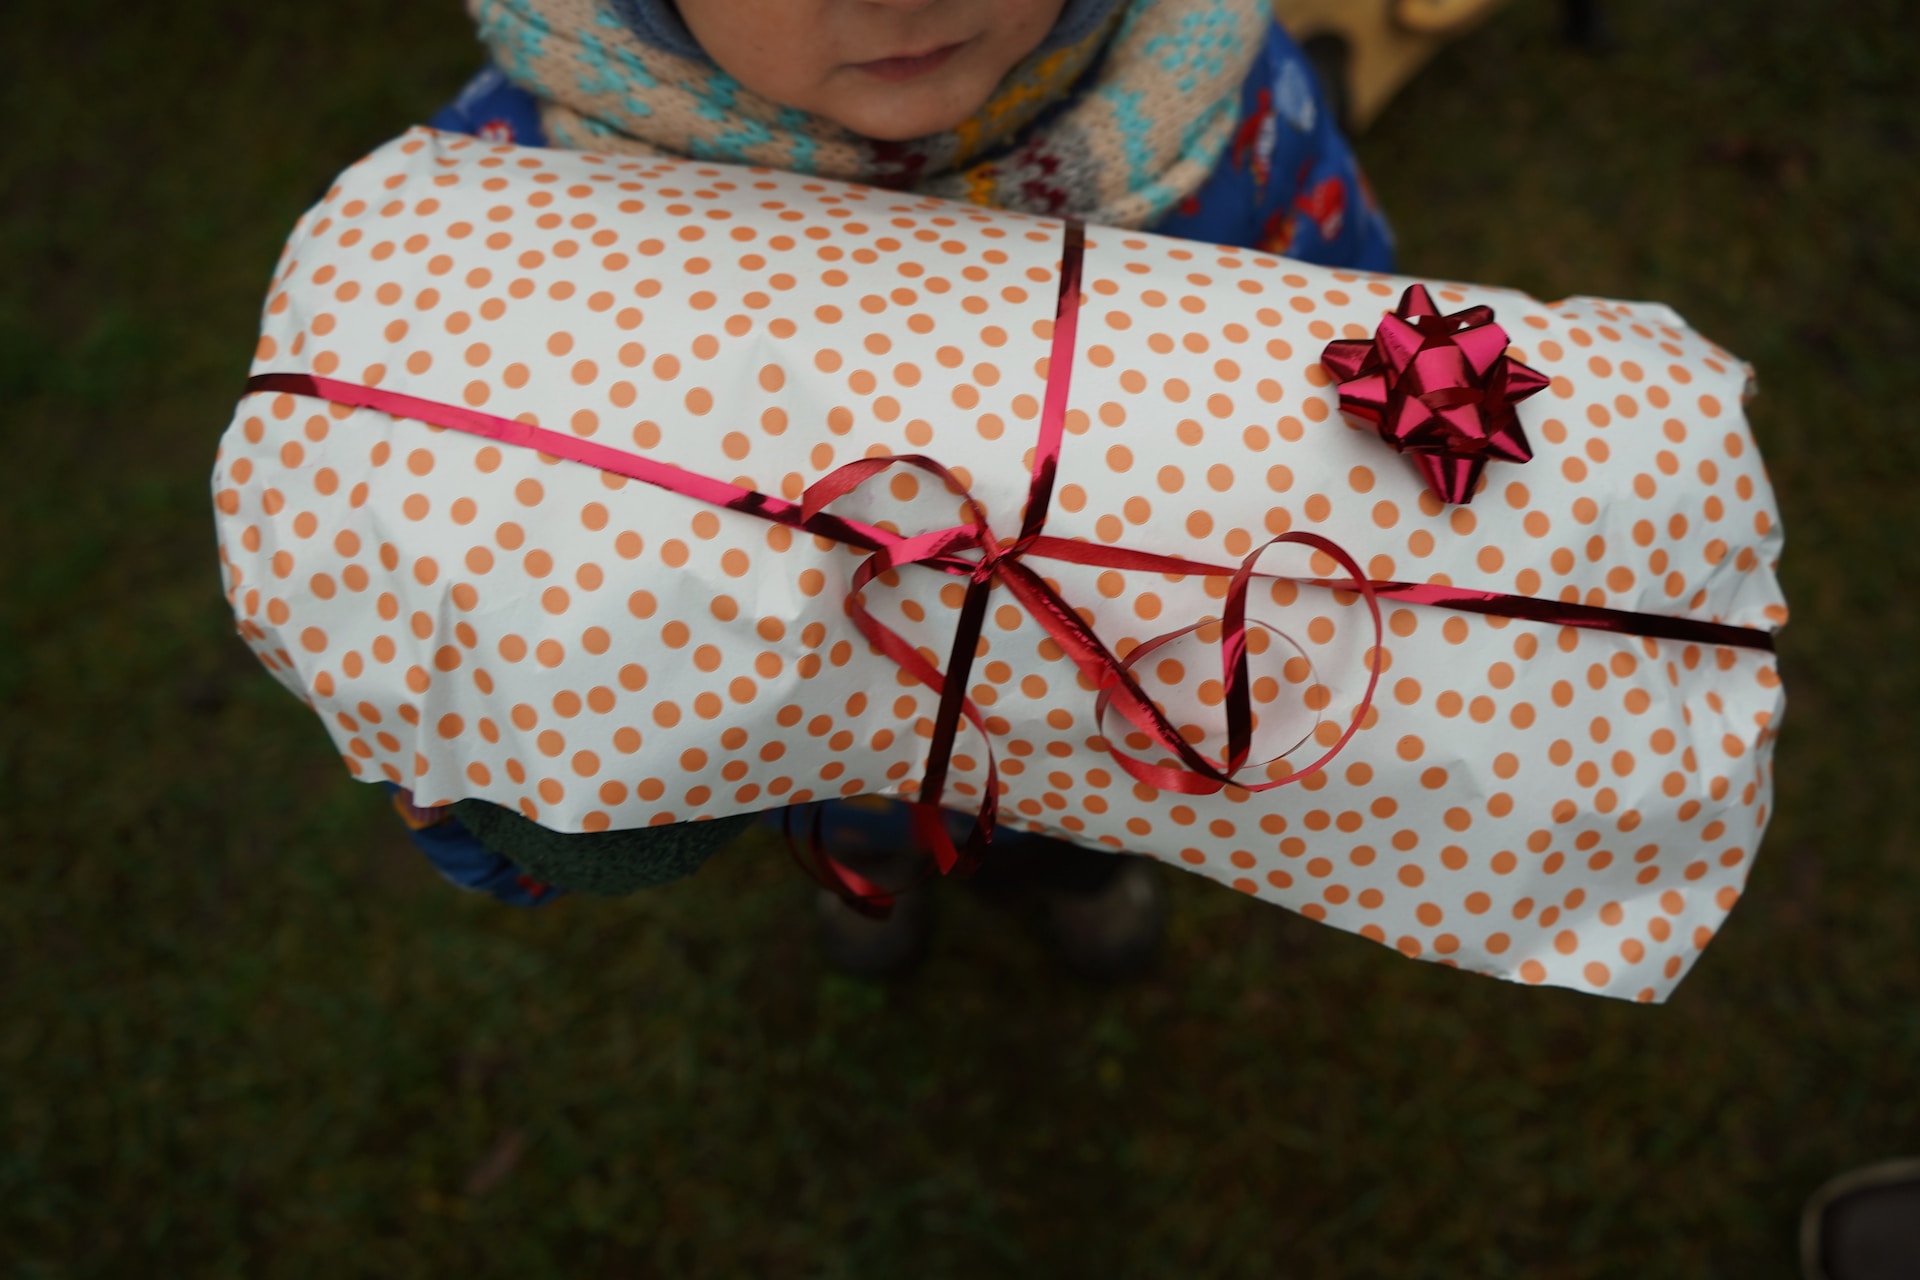 A child holding a wrapped paper present